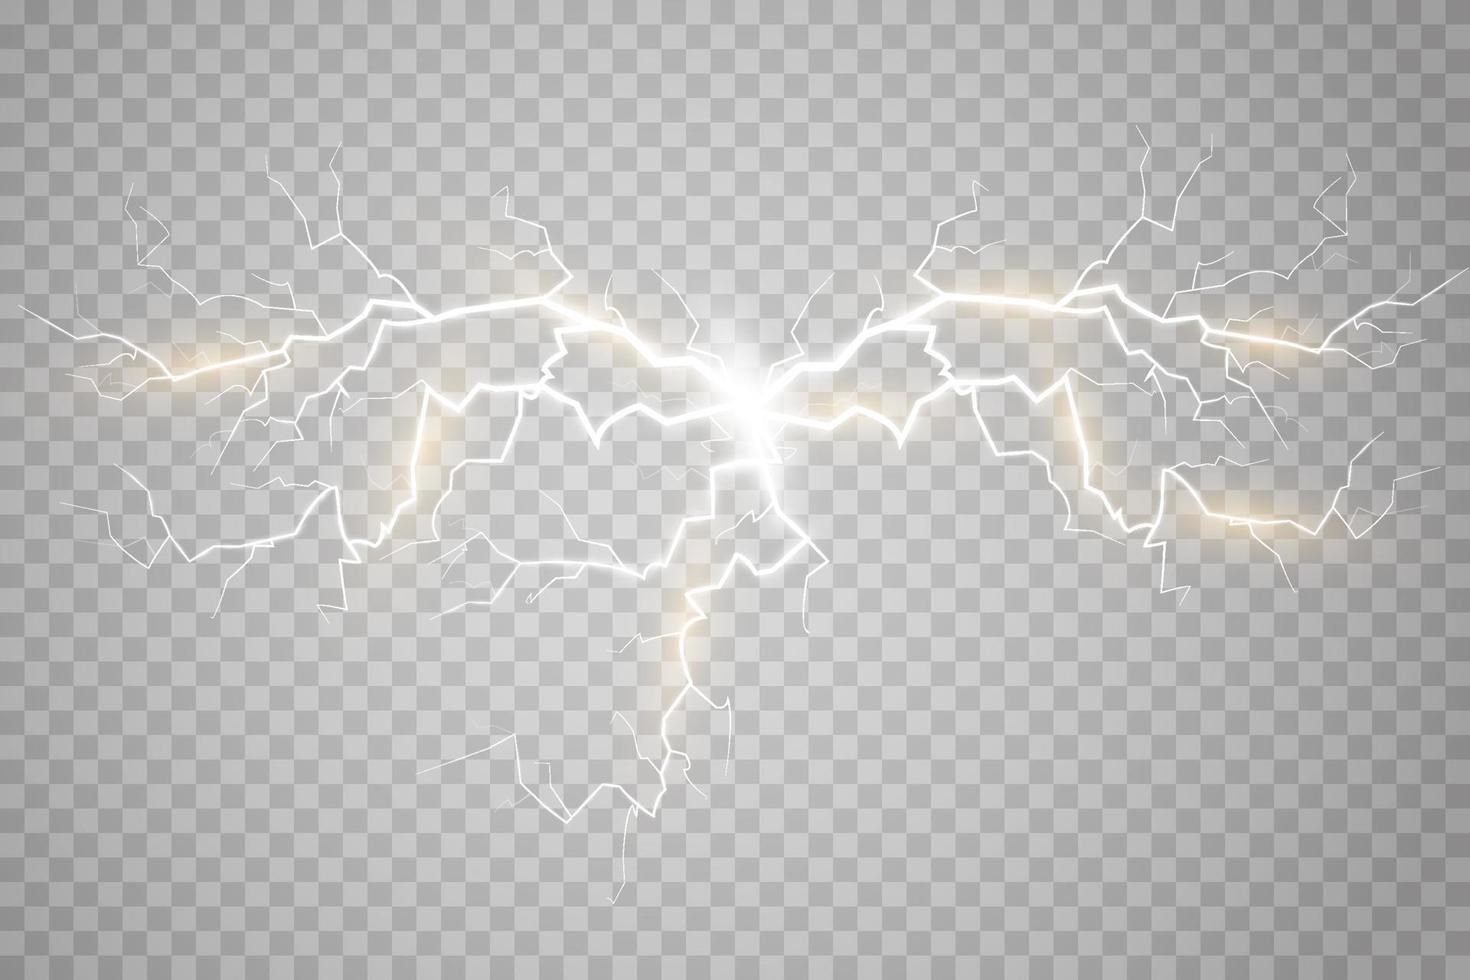 Lightning magical and bright light effect. Thunderstorm with lightning vector